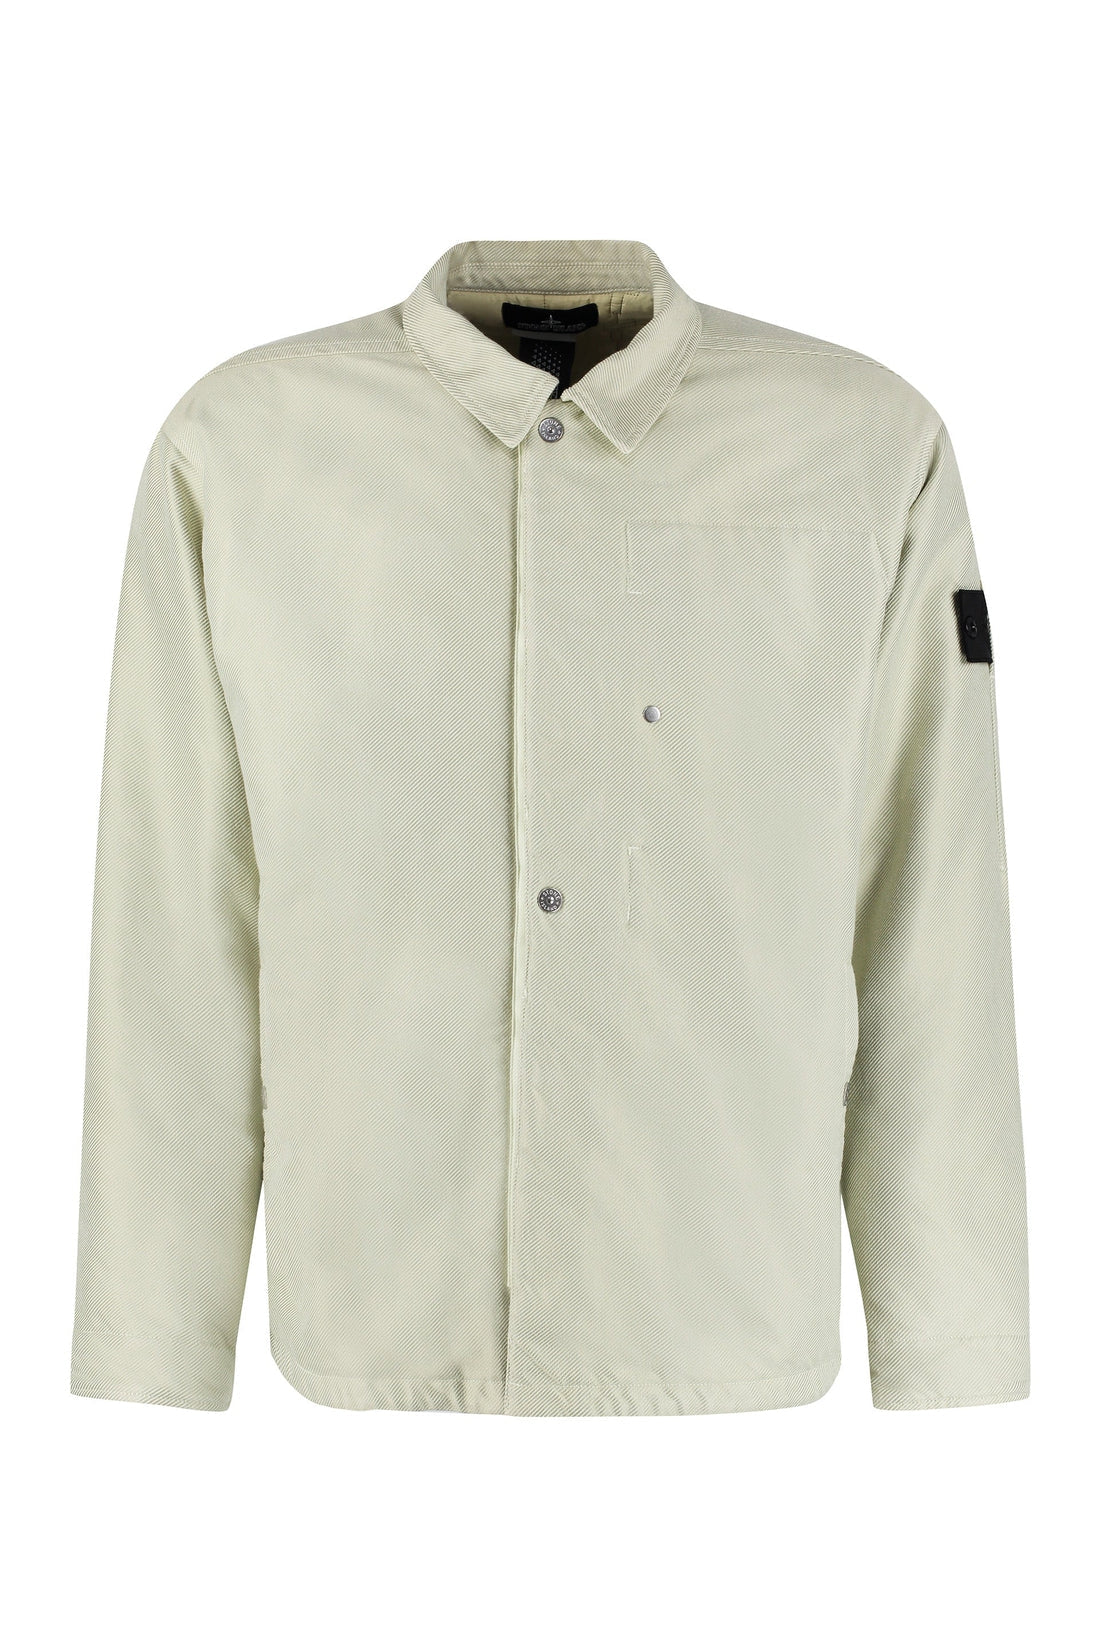 Stone Island Shadow Project-OUTLET-SALE-Button front jacket-ARCHIVIST